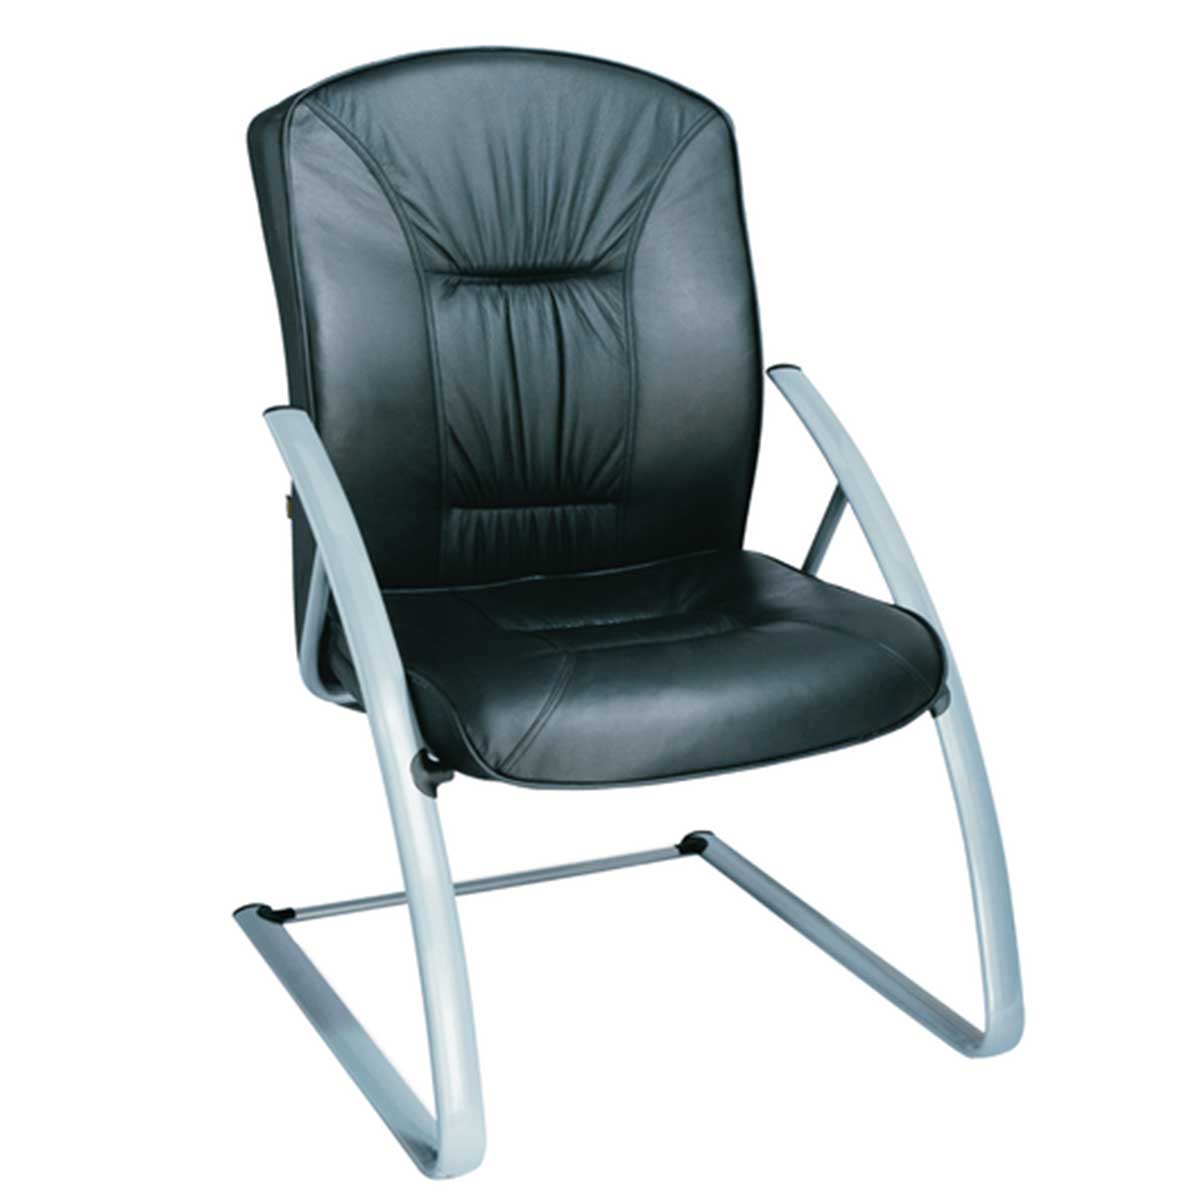 Leather office chair Manufacturers, Suppliers in Rohini